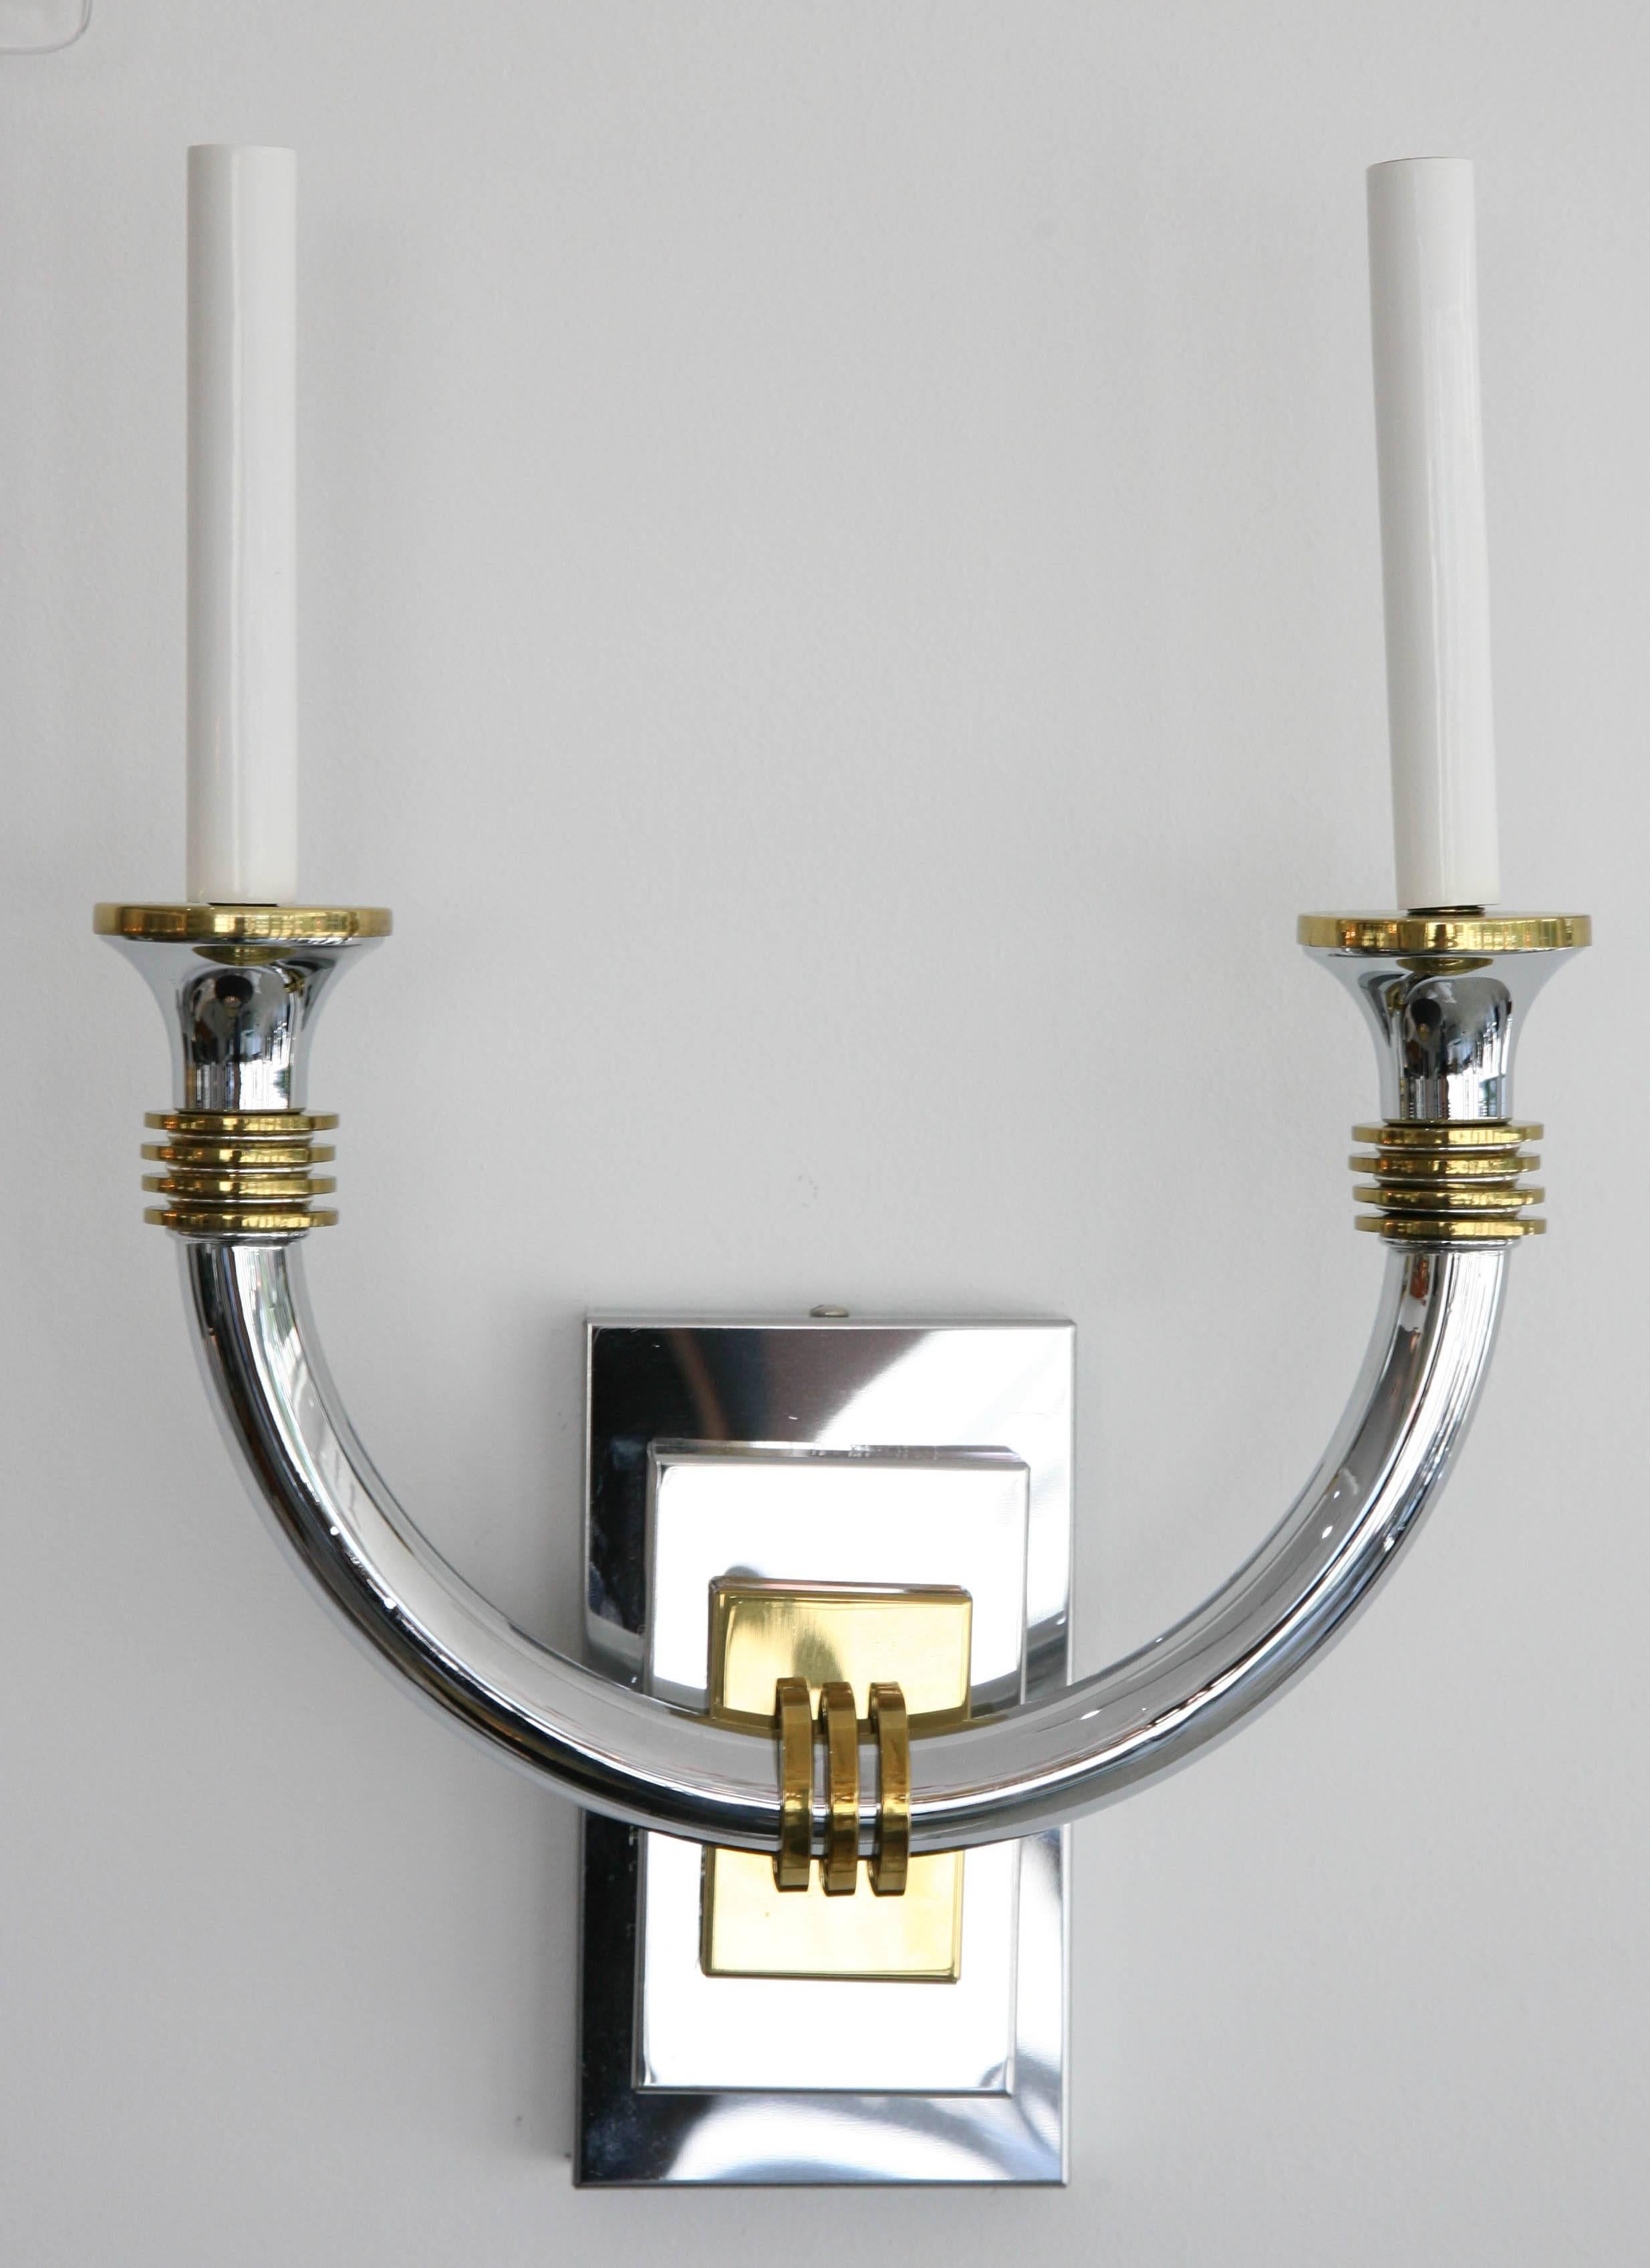 This stylish pair of wall sconces have taken the inspiration for the glamour of the Art Deco period. They are in polished chrome and brass and were produced in Italy.

Note: The lead photo shows flecks on the arms of the sconces. These are